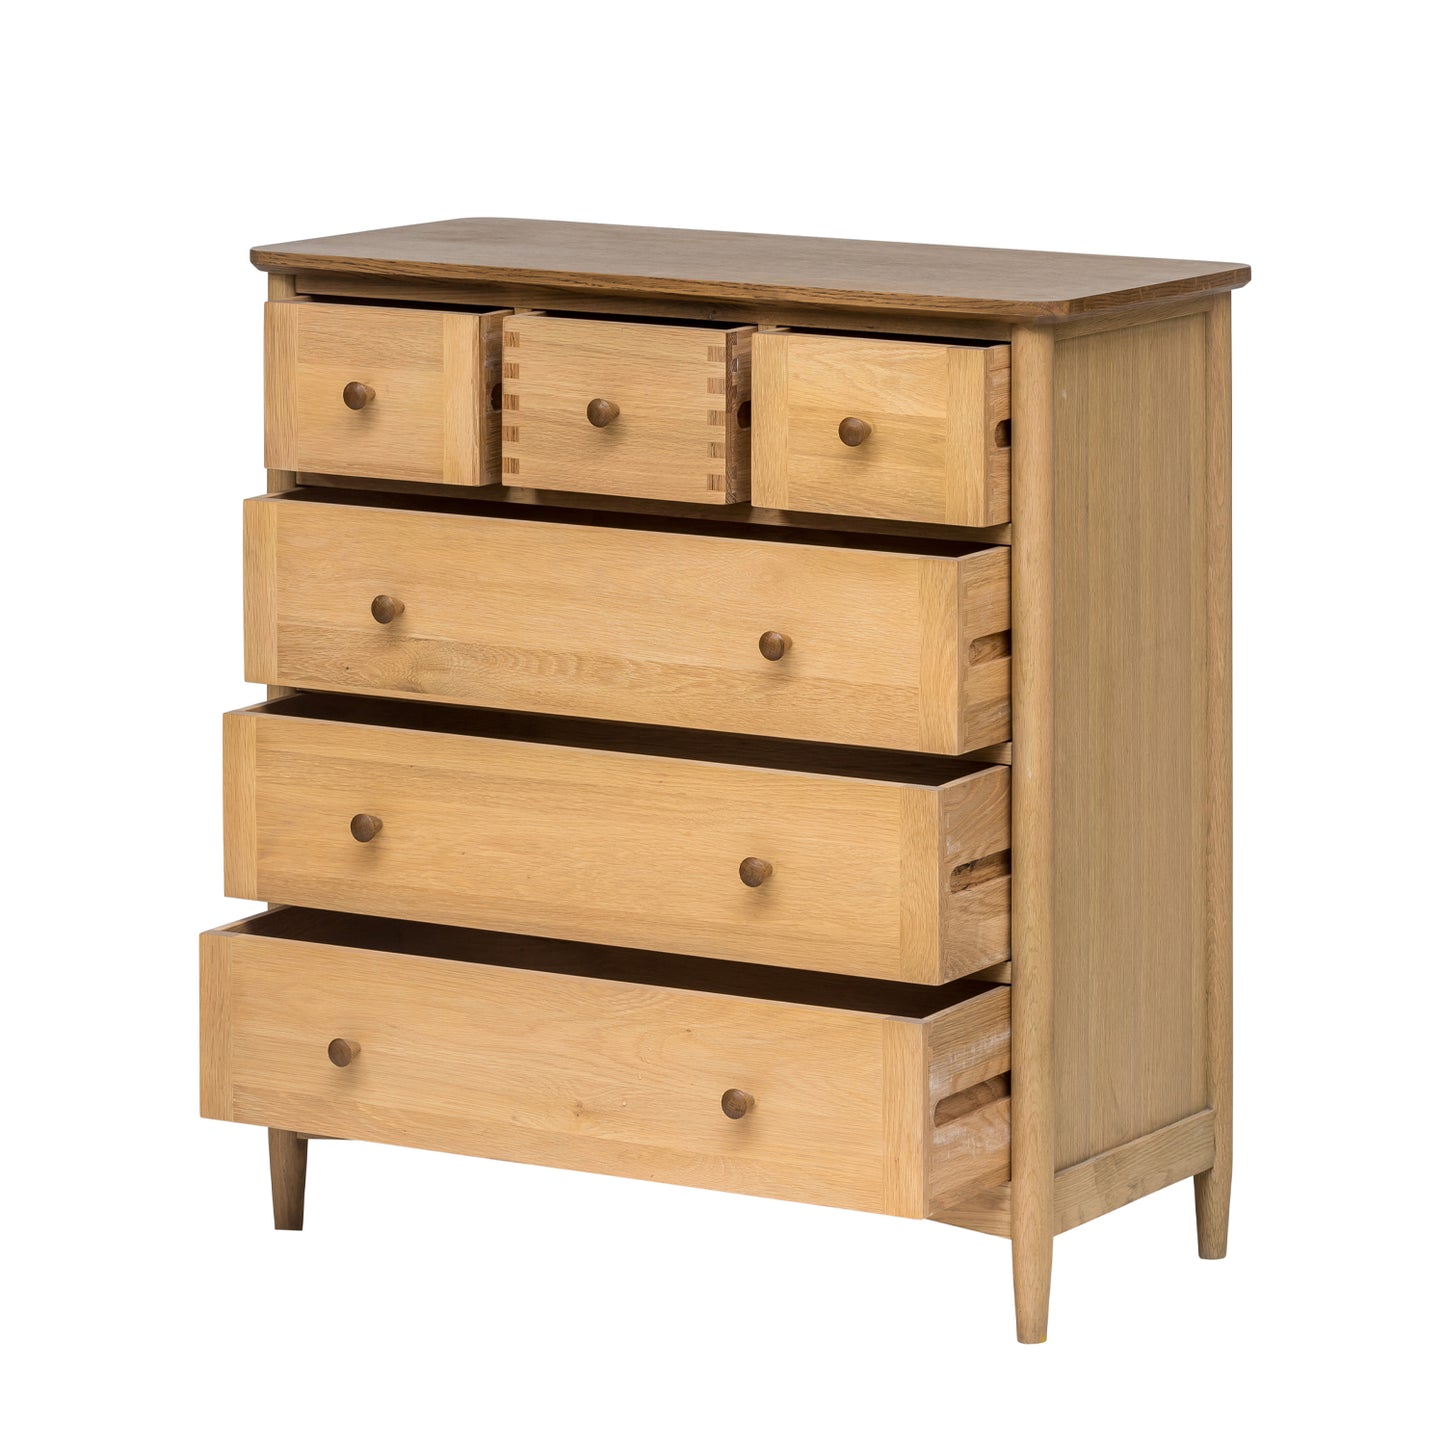 Henley Chest of Drawers - 3+3